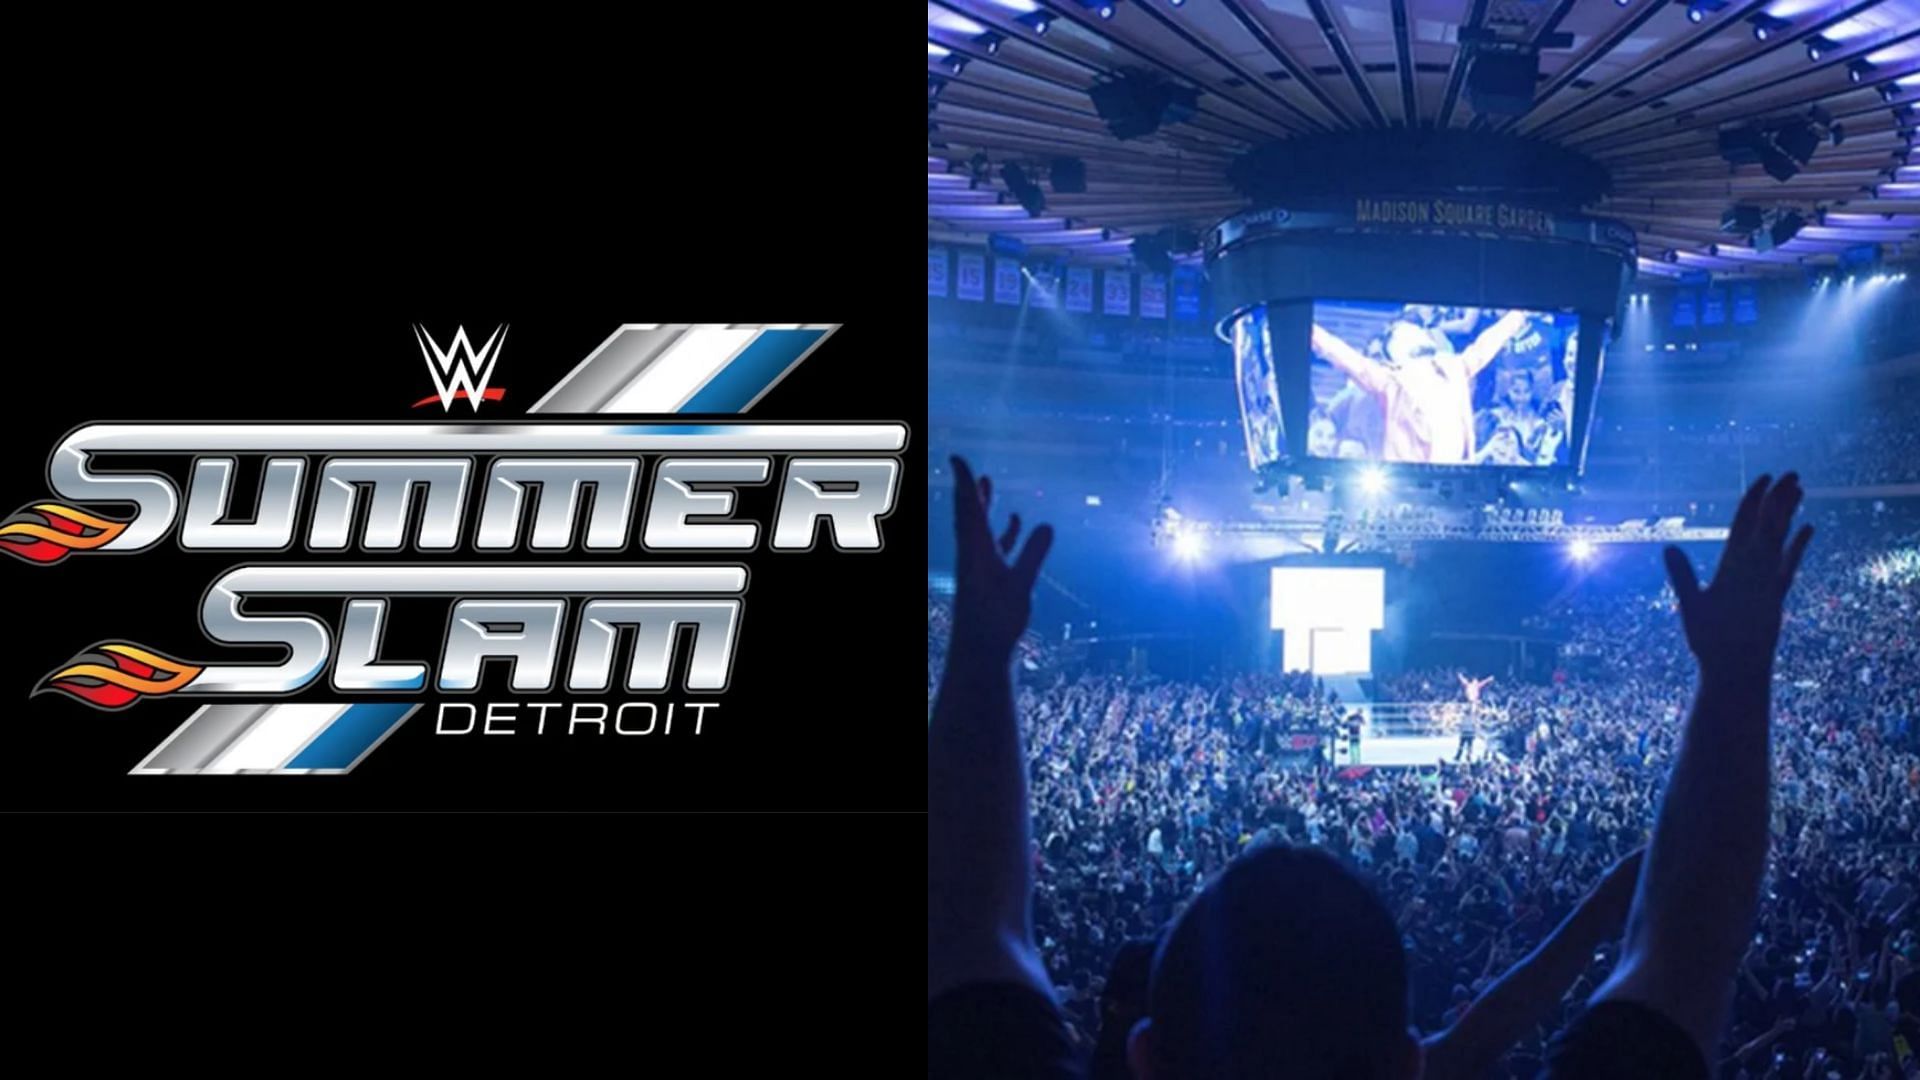 WWE is set to have a major event before